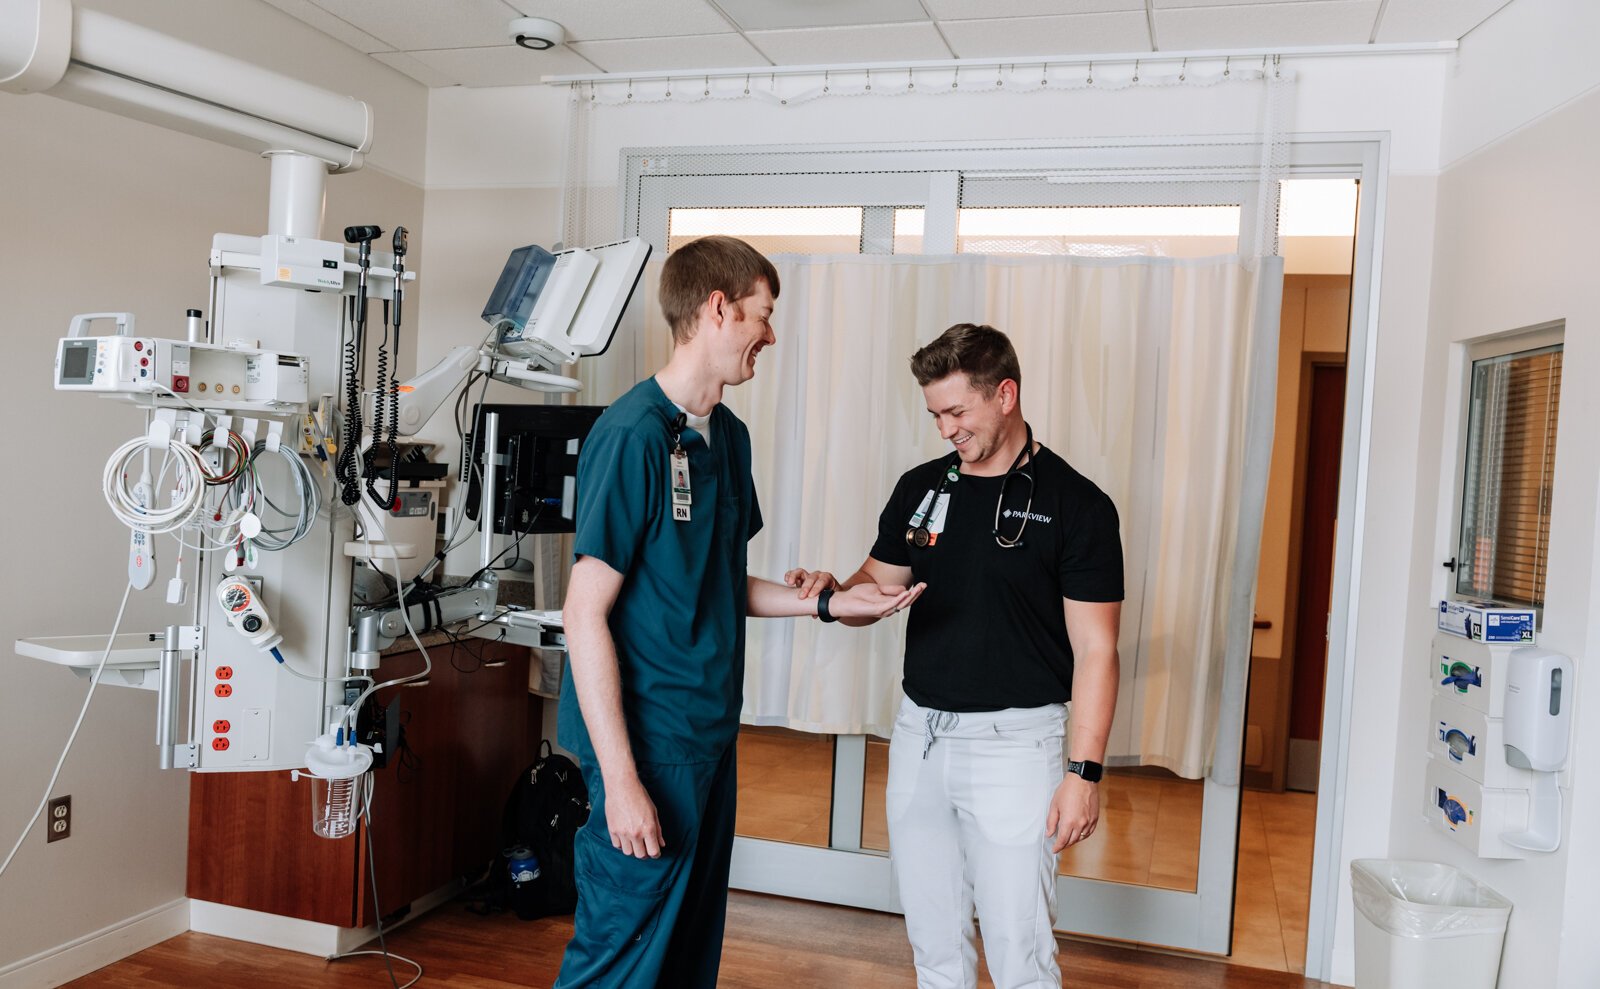 Jayce Colclasure, Student Nurse Apprentice, right, practices an assessment with his mentor Colin Fassold, Registered Nurse at Parkview Regional Medical Center.